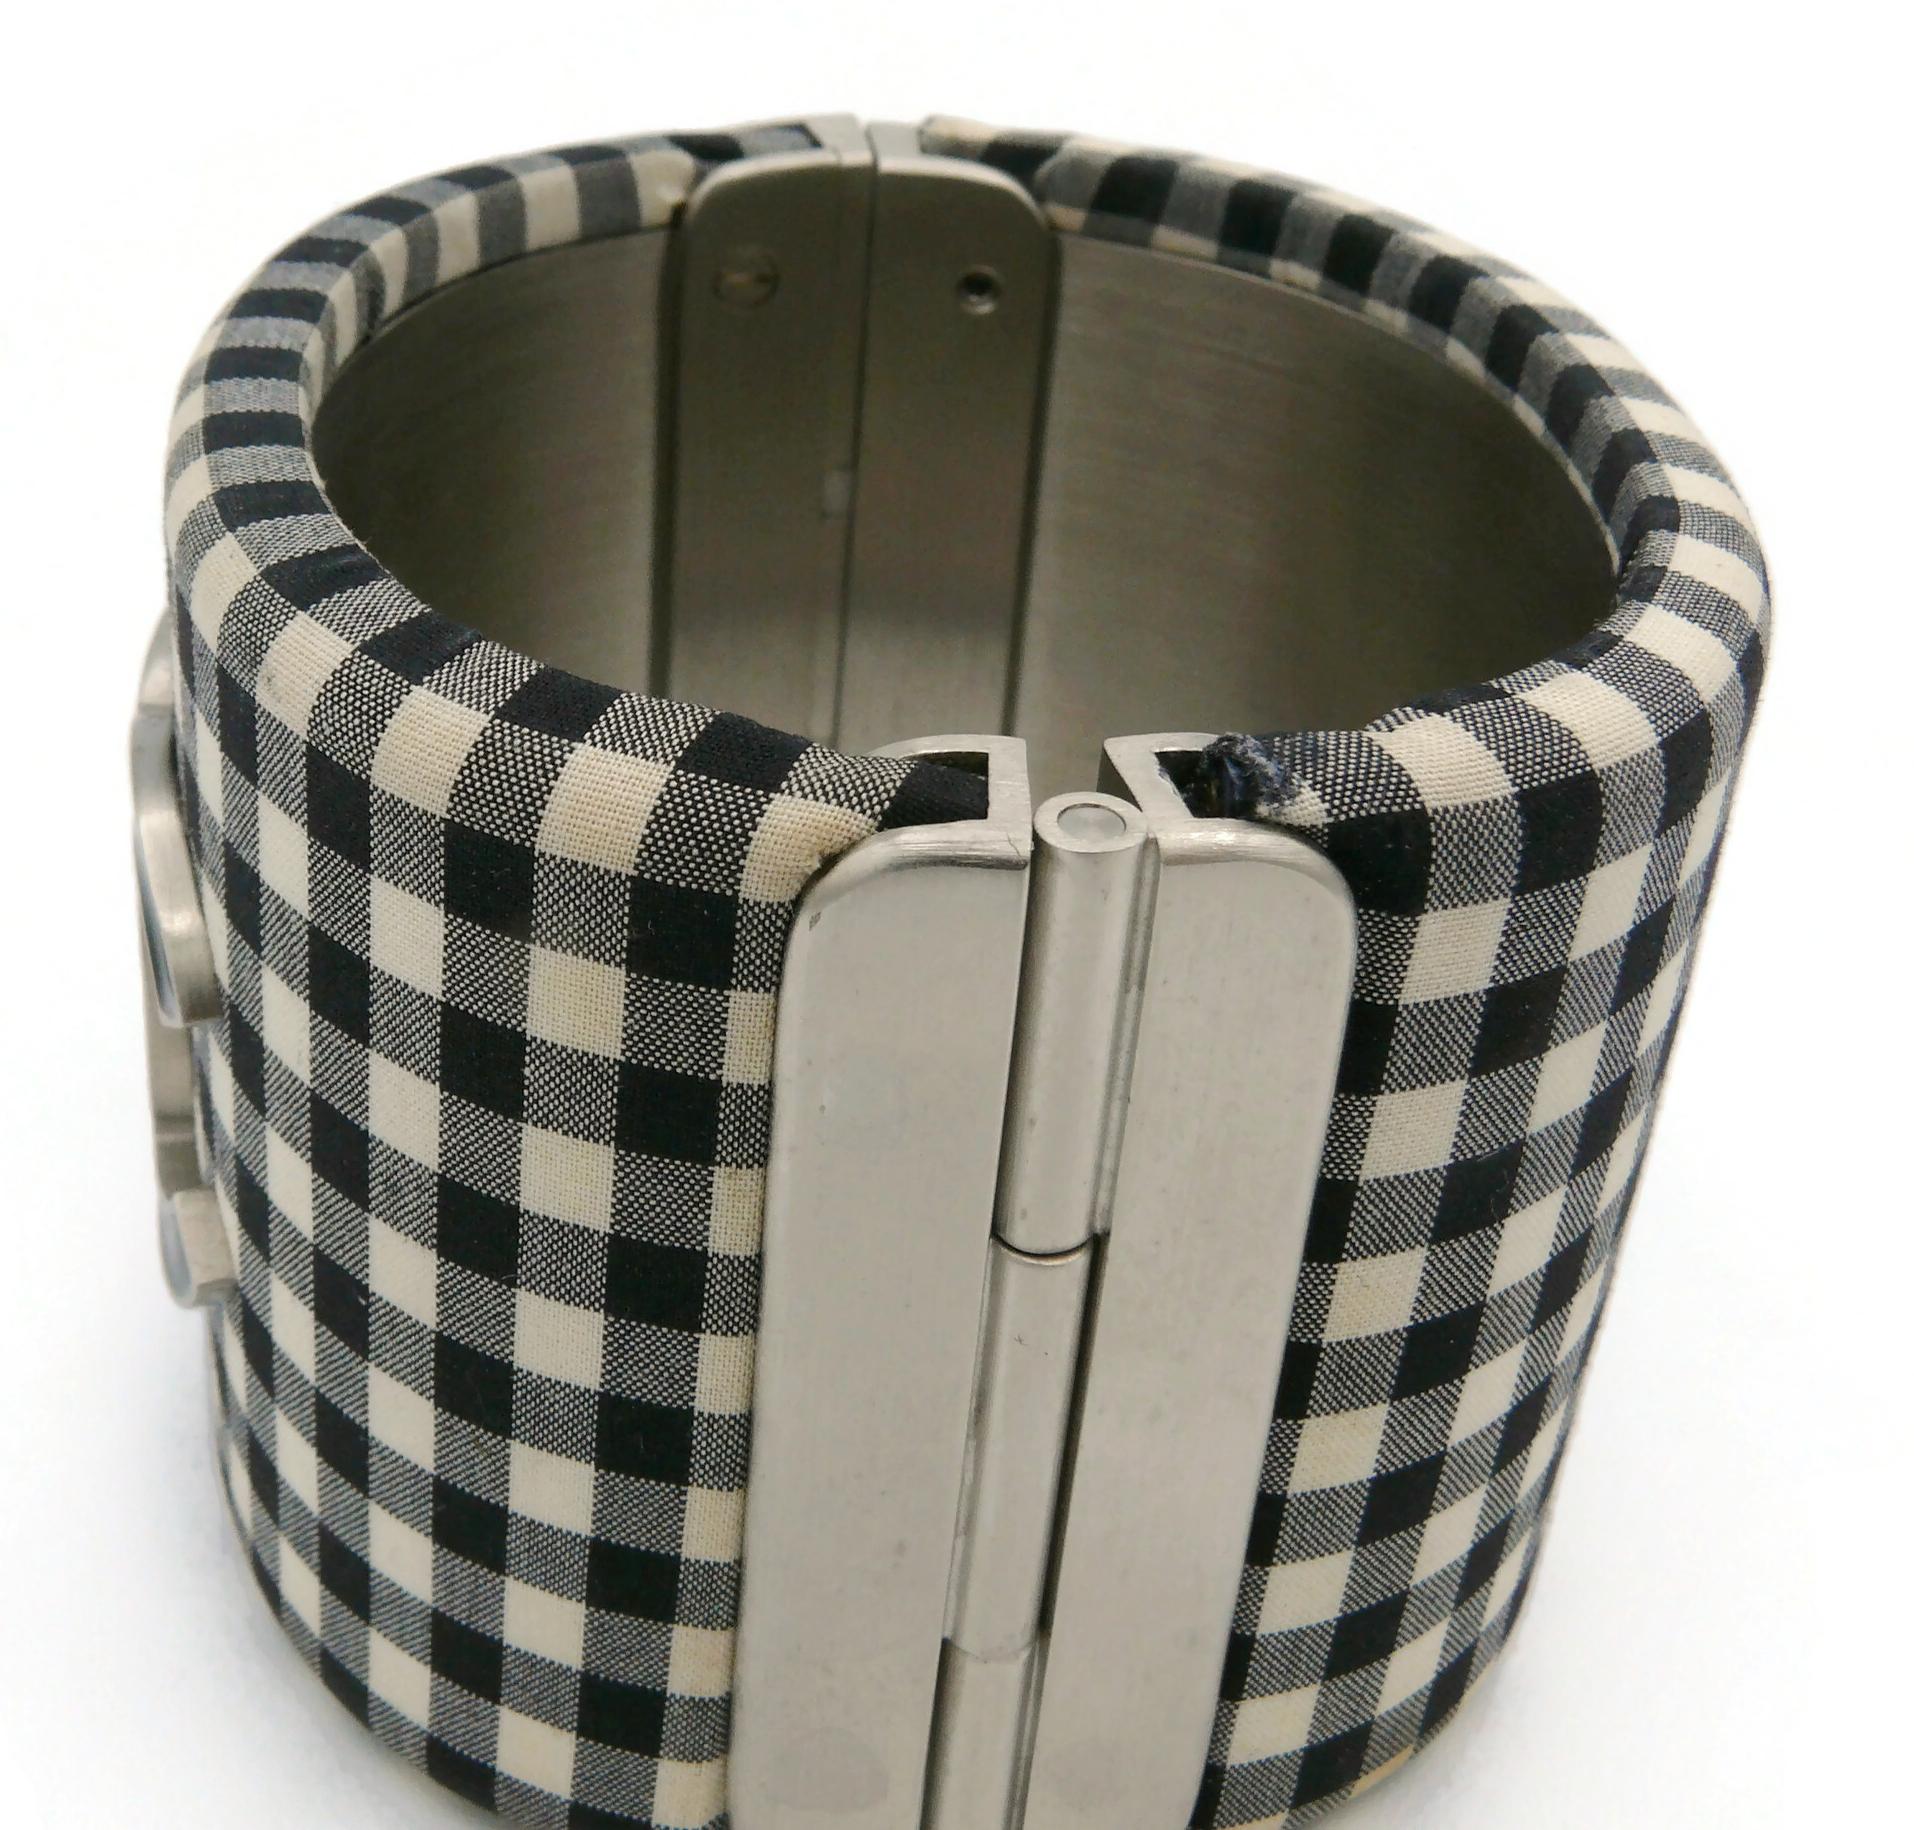 CHANEL Black and White Gingham Vichy Print Cuff Bracelet, Resort Collection 2011 For Sale 4